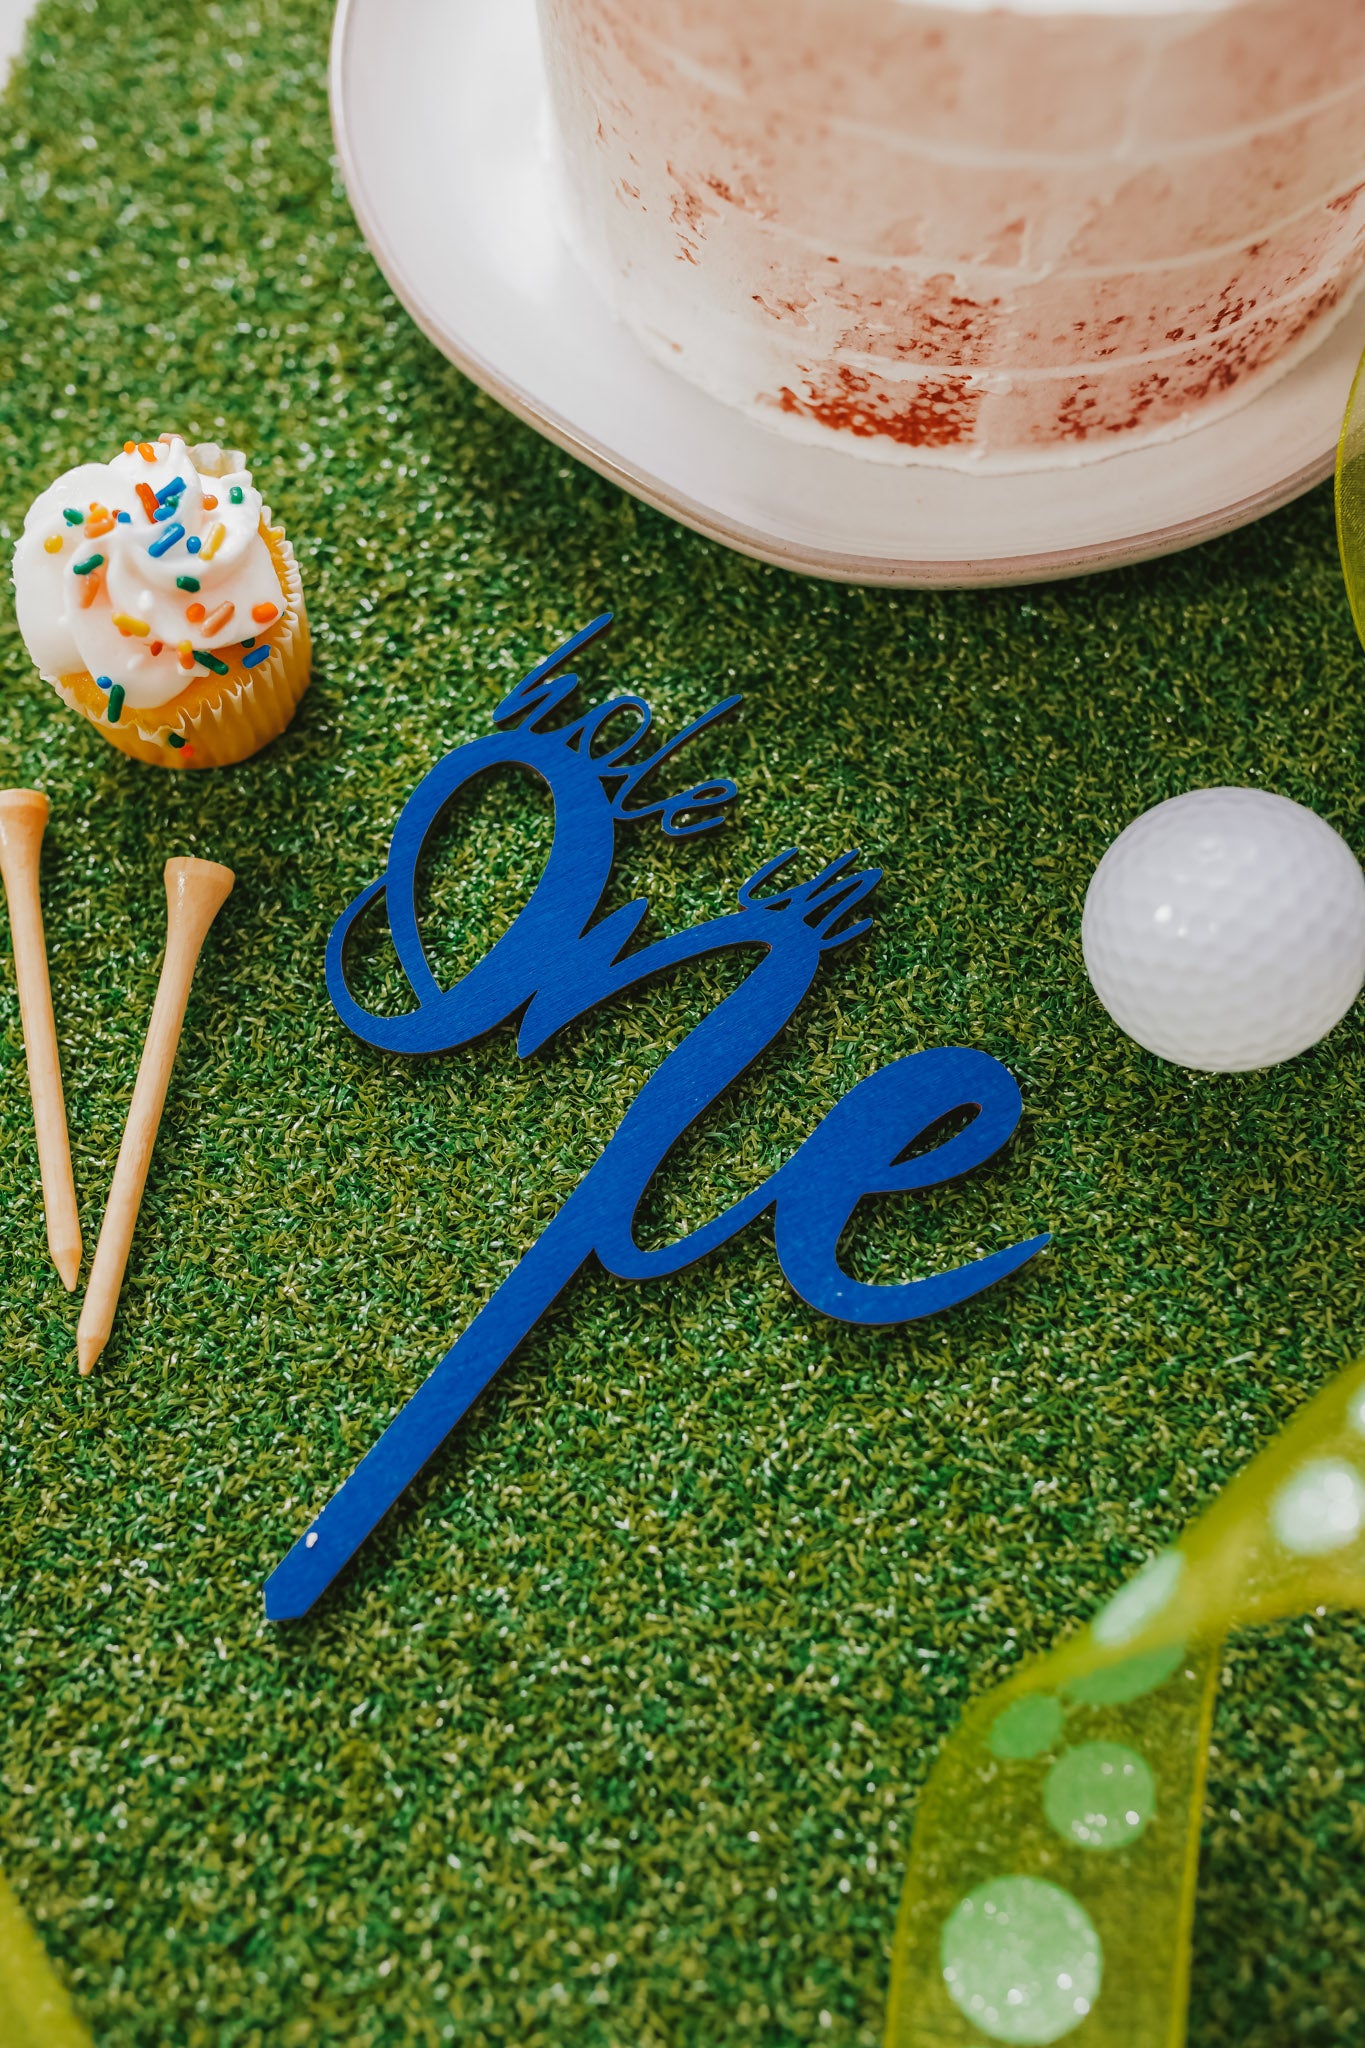 Hole In One Navy Blue Cake Topper For Boys First Golf Birthday, Hole In One Boys Cake Topper For Baby Boy Cake Smash Photoshoot